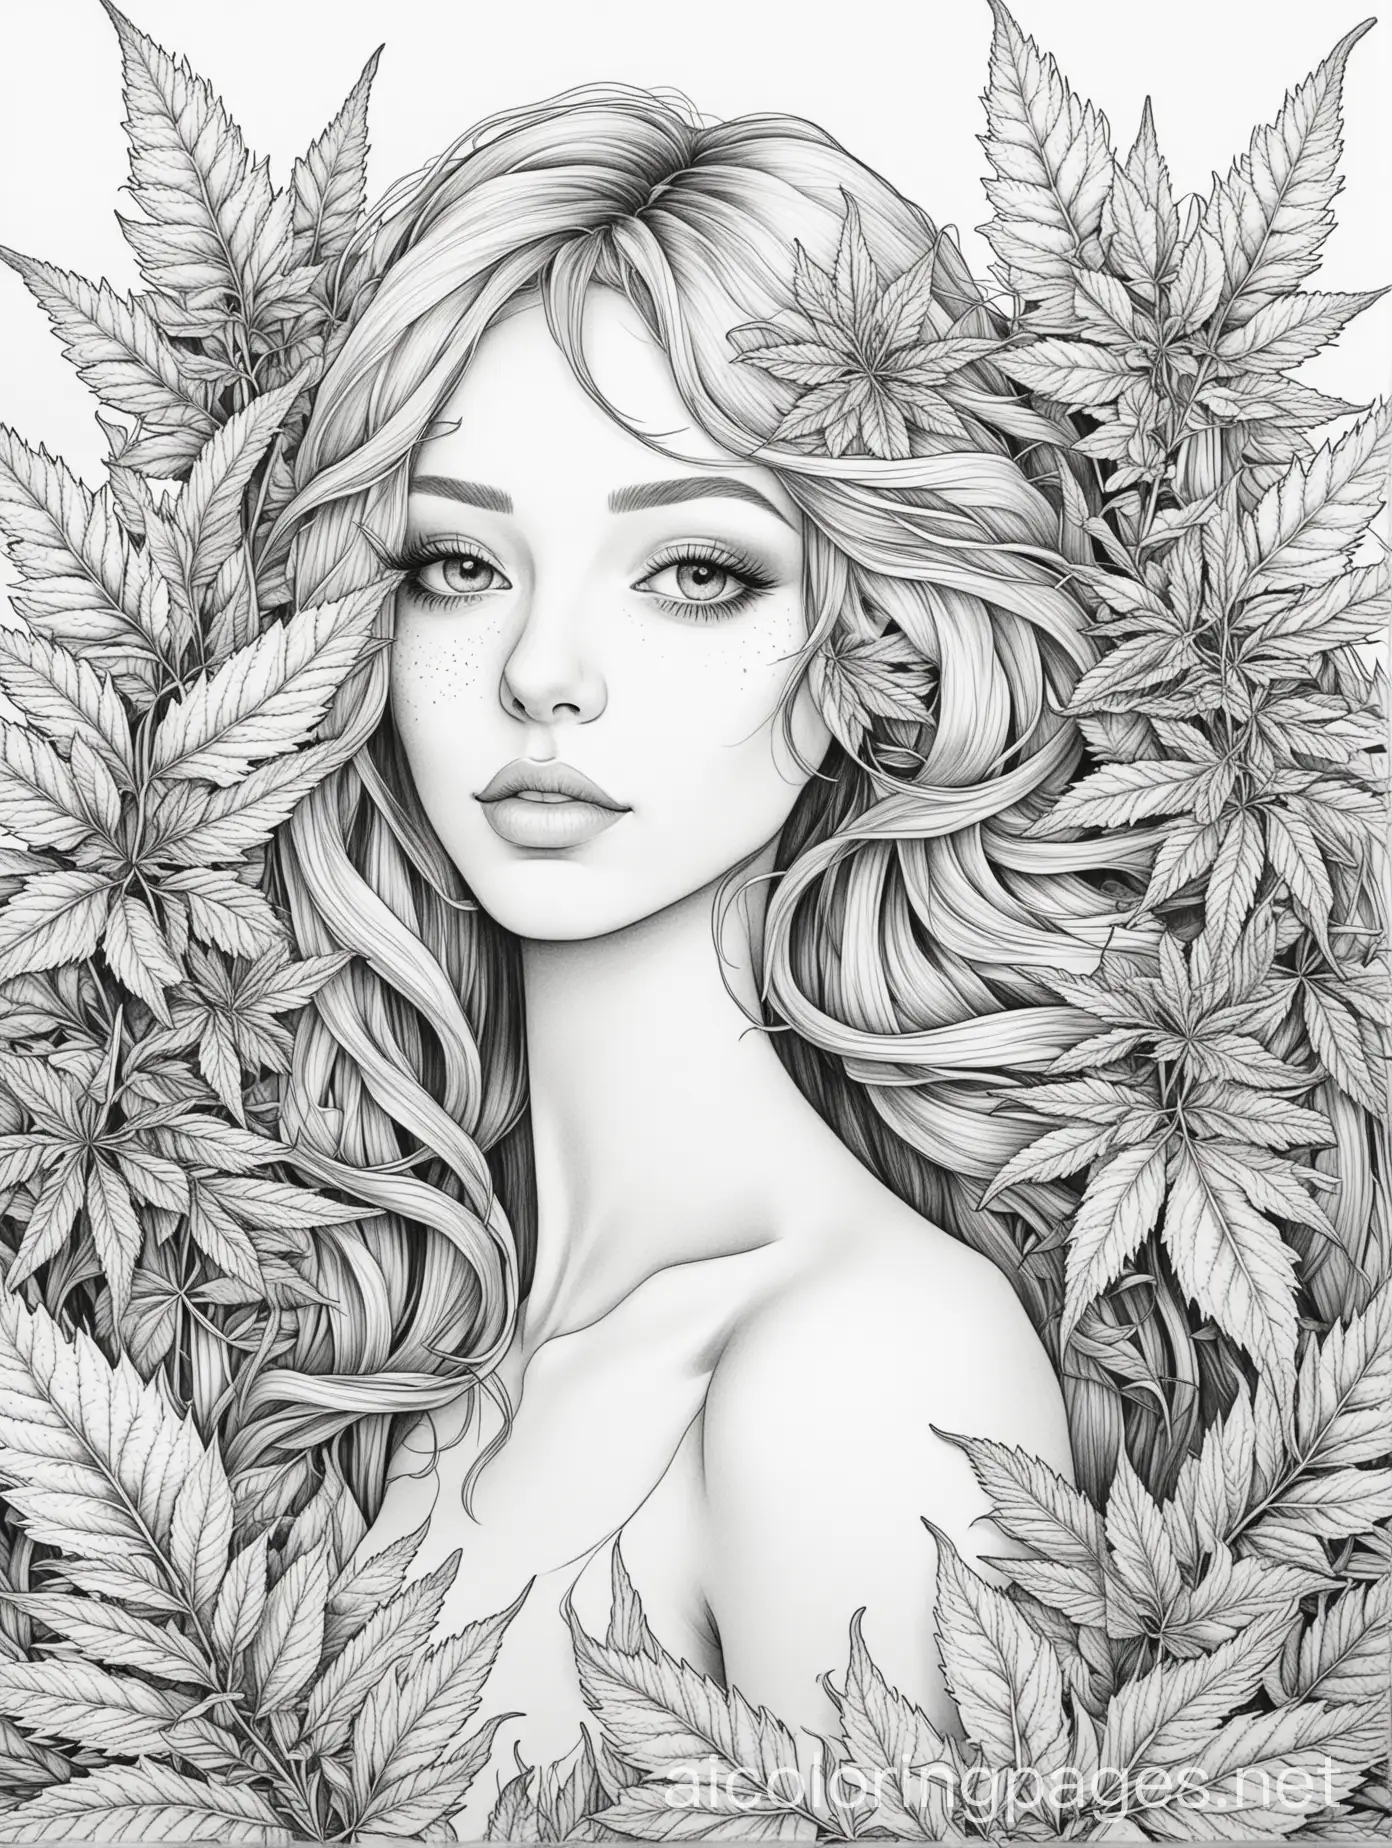 A female surroundee by beautiful flowrrs and cannabis leaves coloring page, Coloring Page, black and white, line art, white background, Simplicity, Ample White Space.